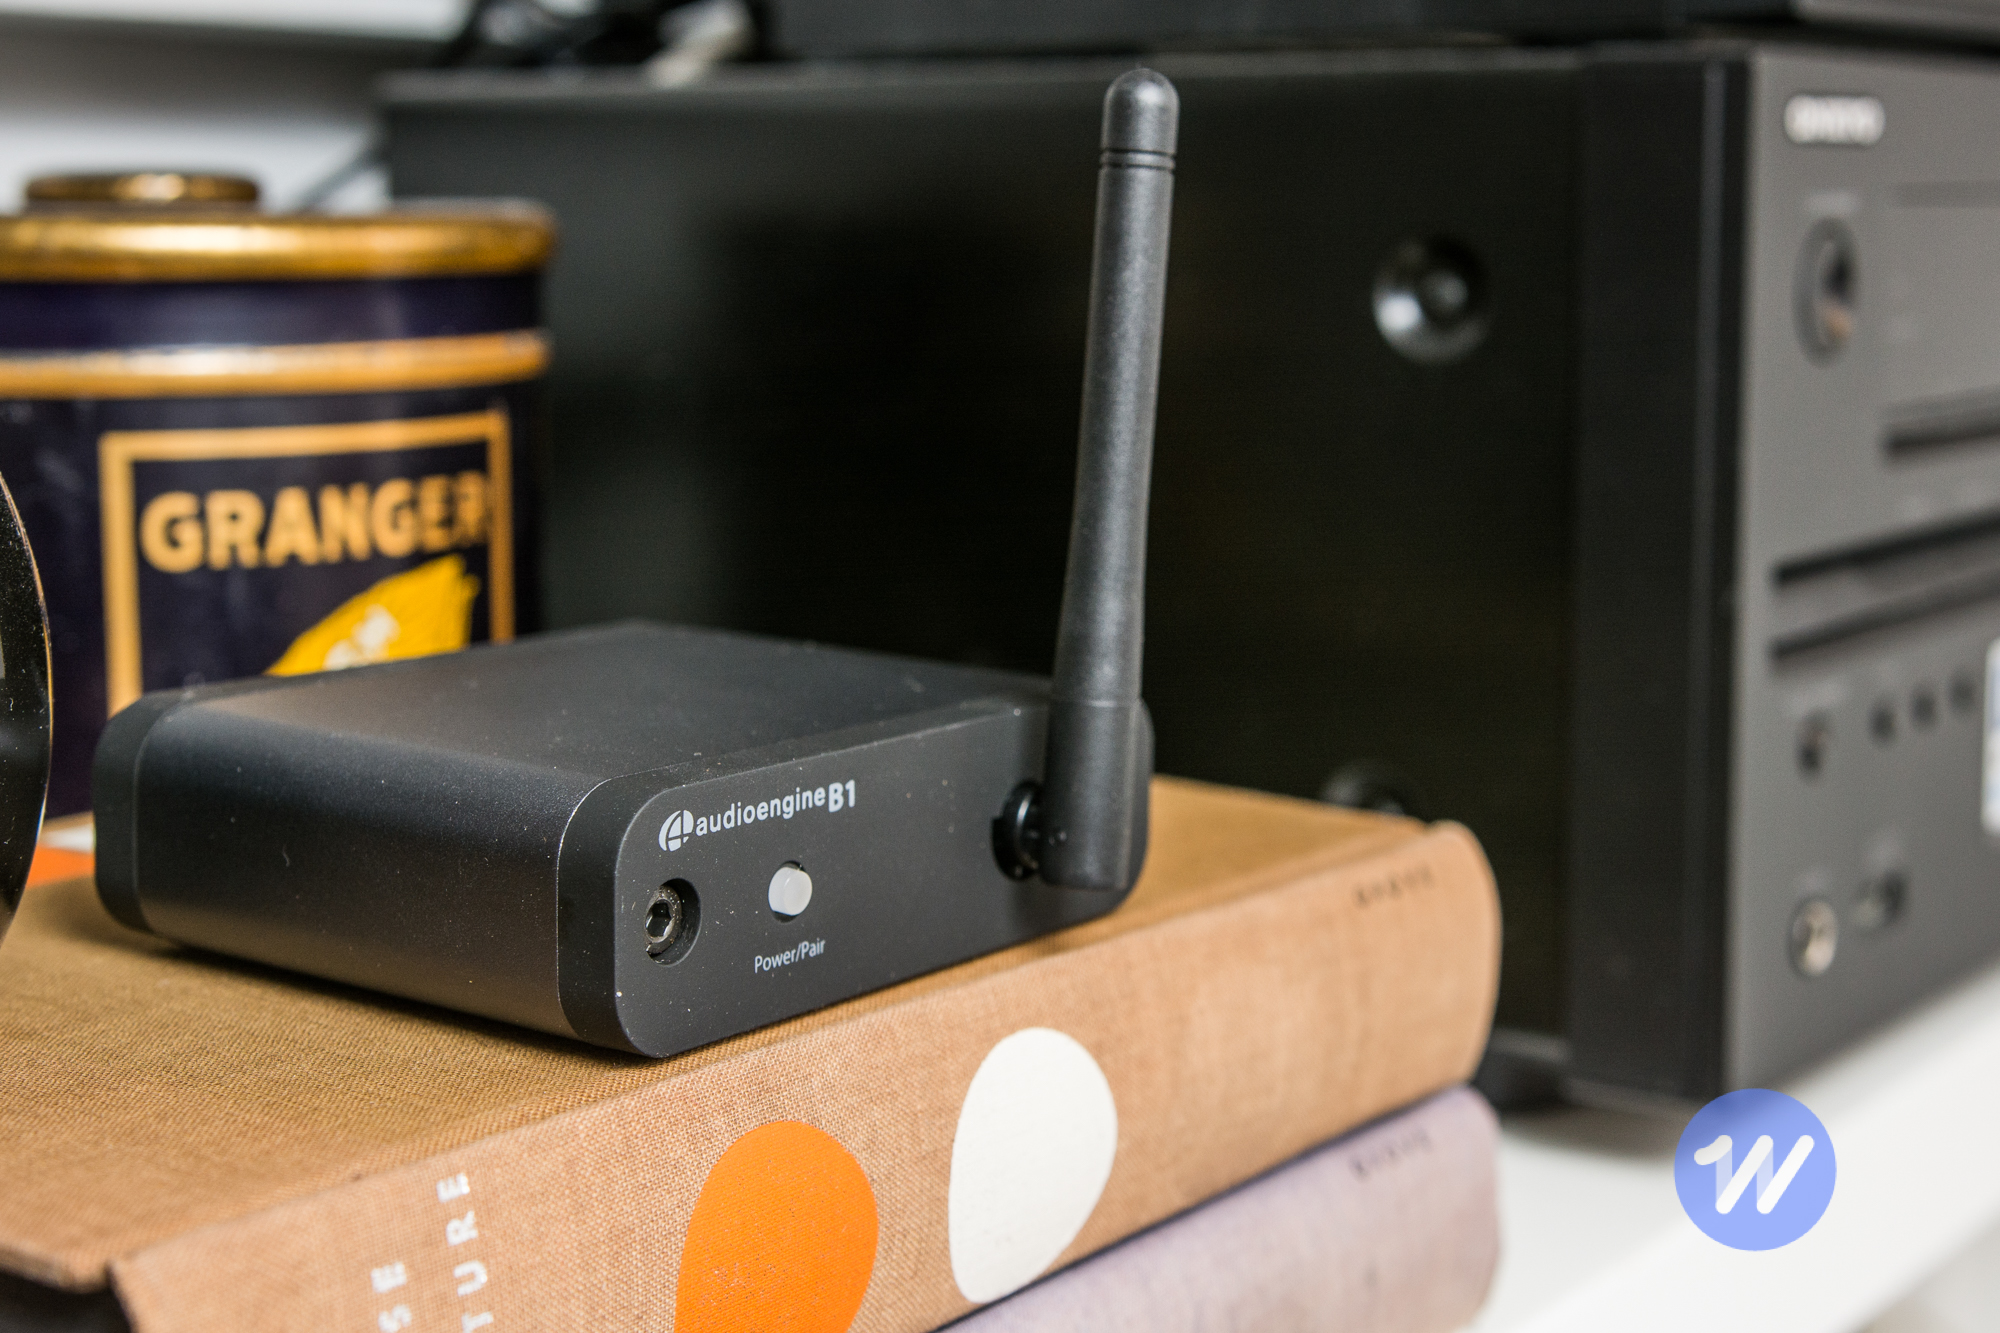 The best Bluetooth audio receiver for your home stereo or speakers